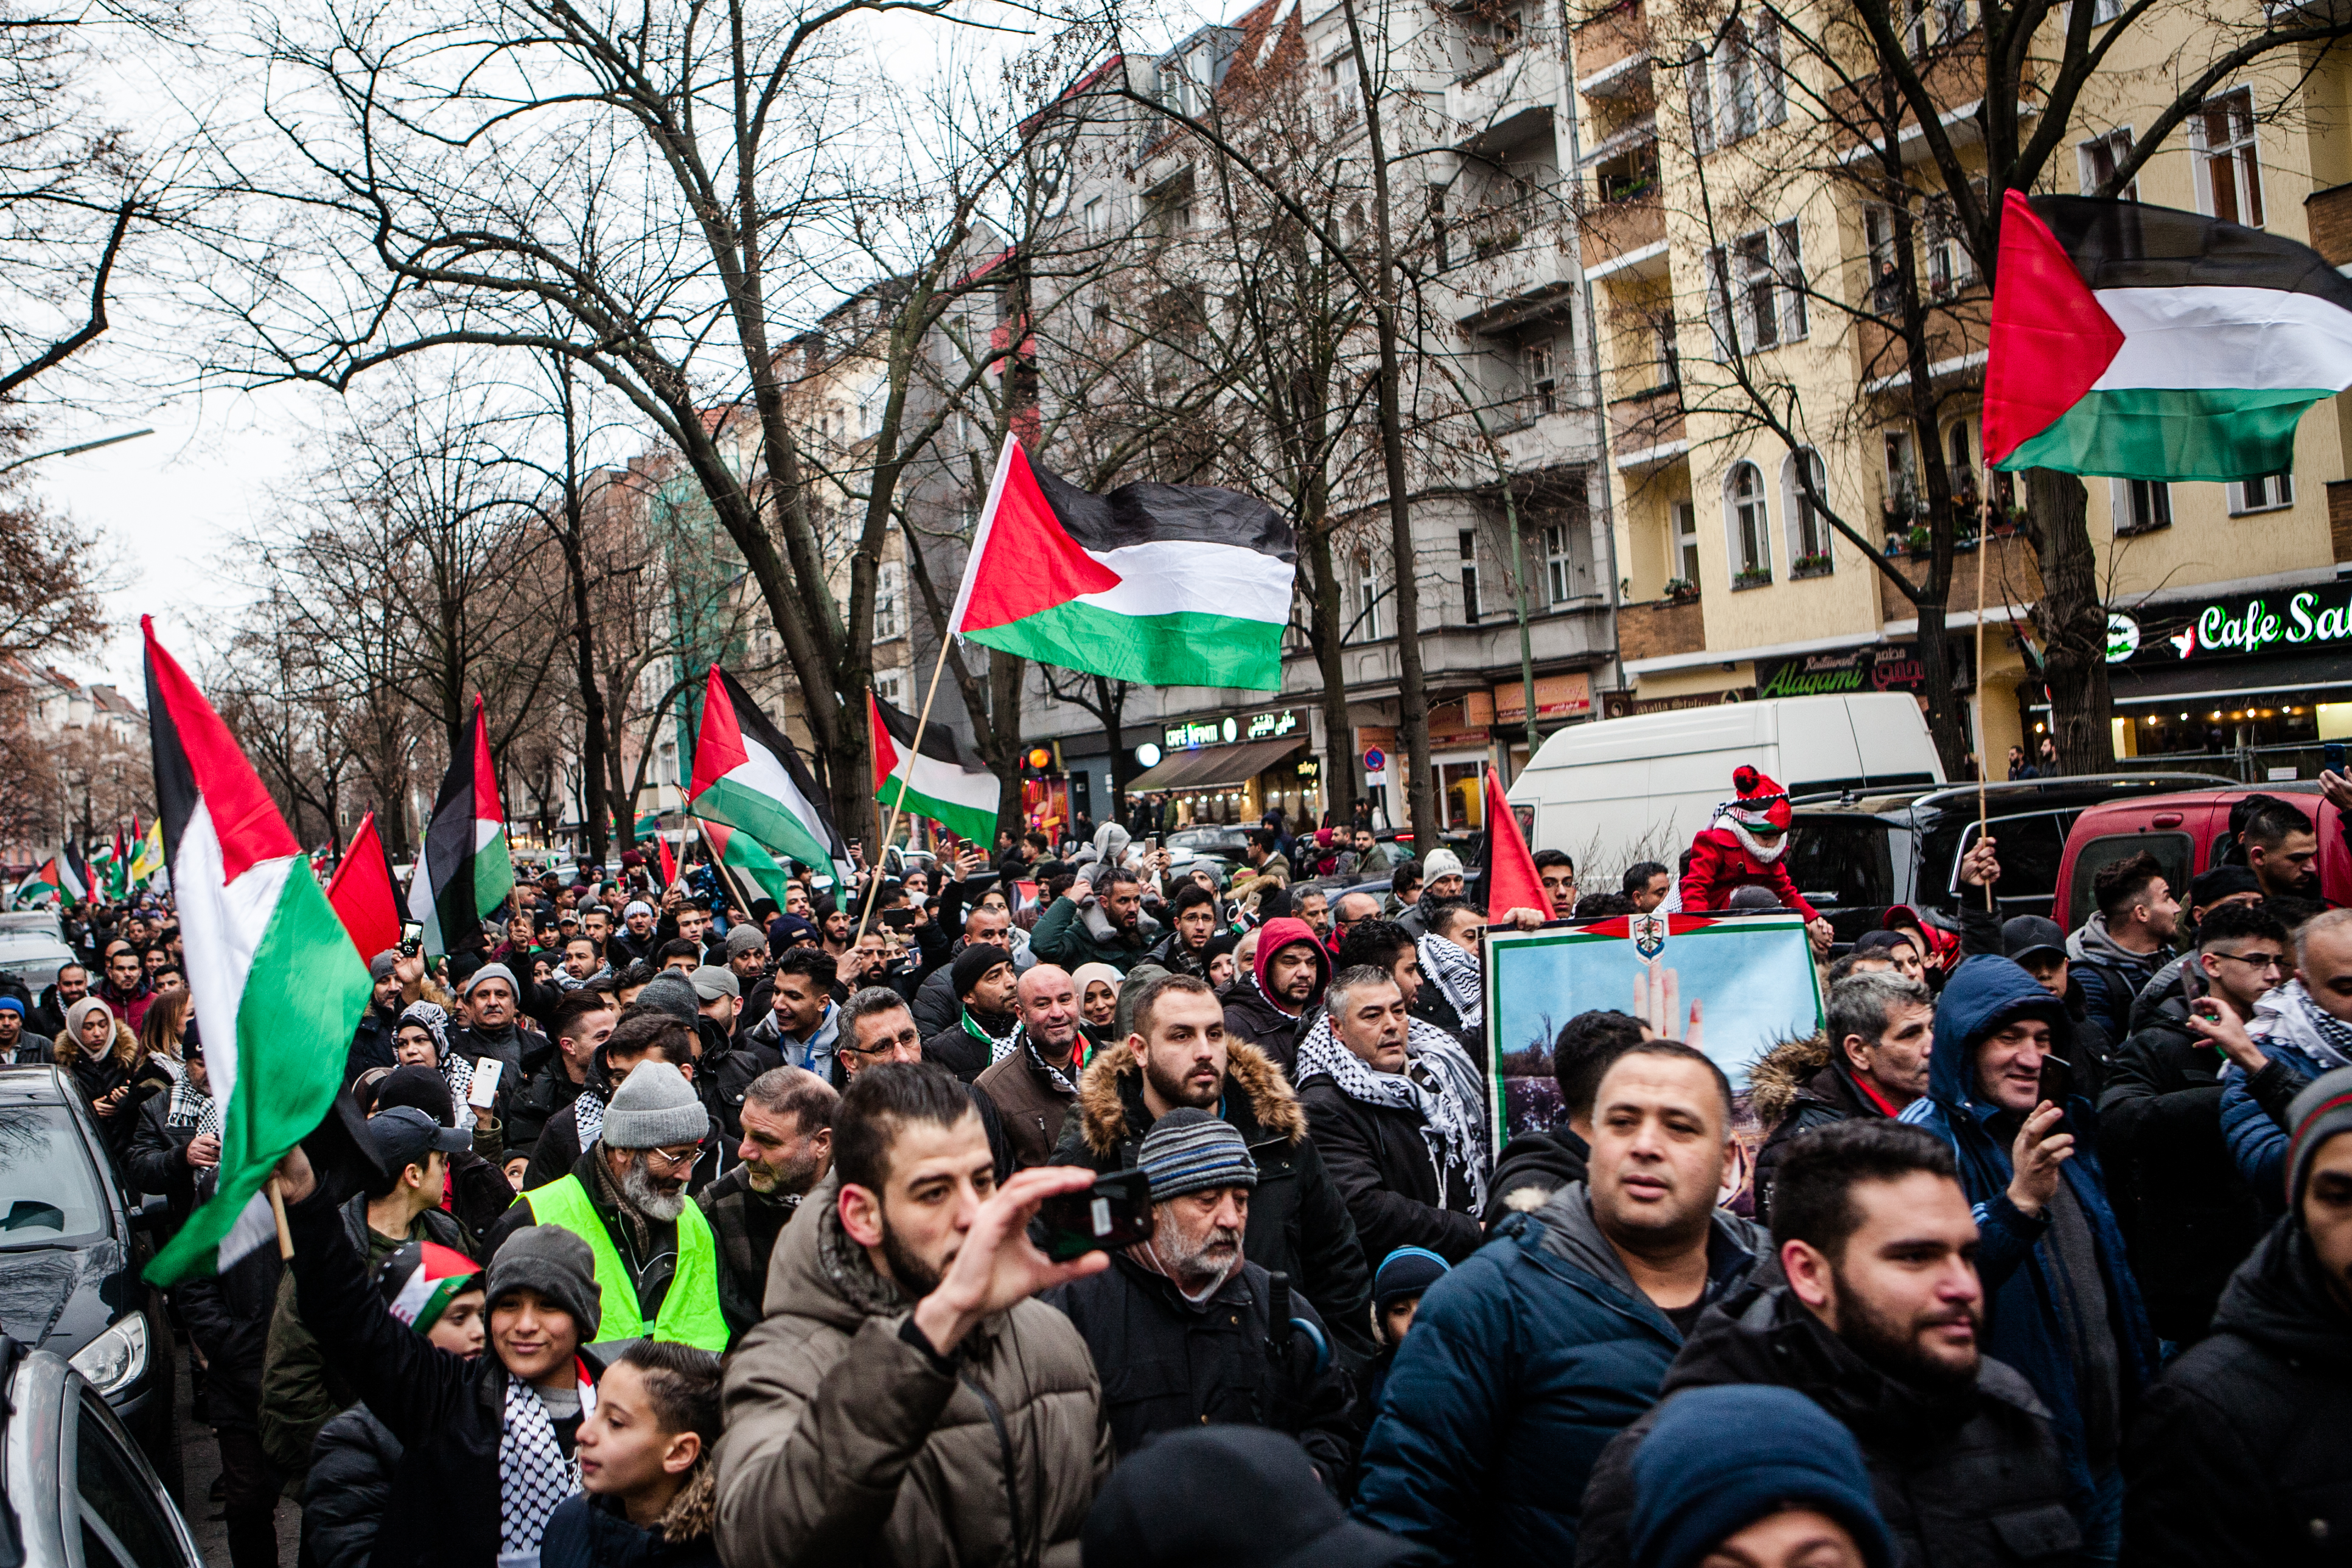 File:Palestine solidarity protest (38102050565).jpg - Wikimedia Commons